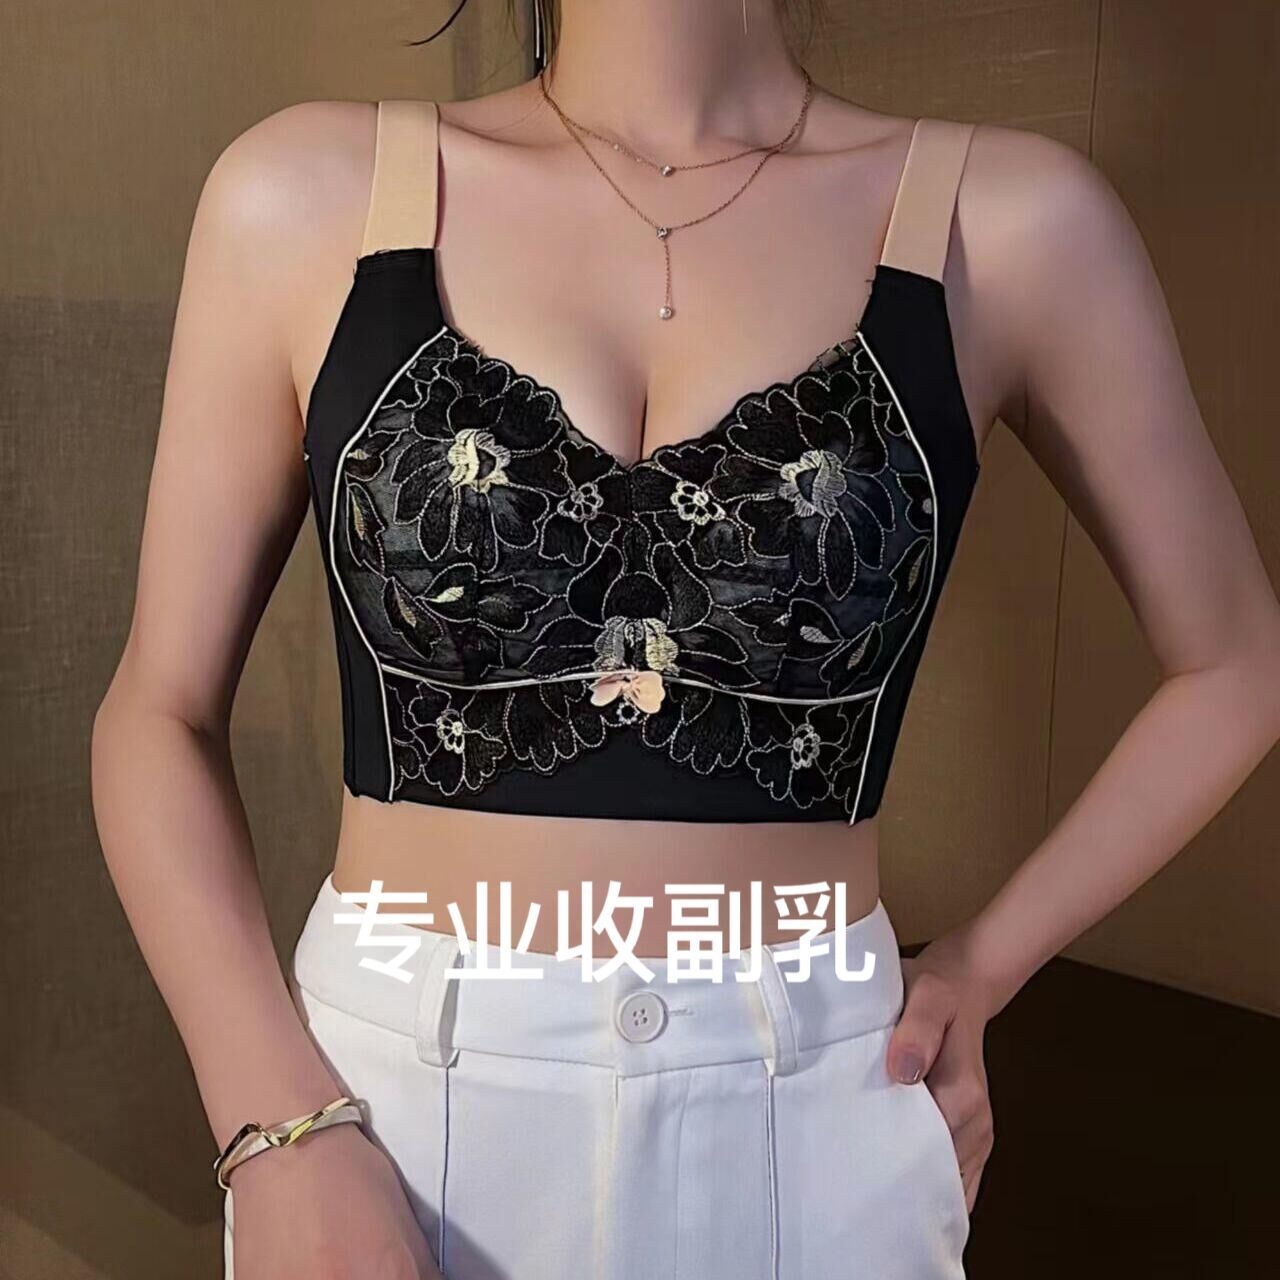 Large breasts showing small underwear women's adjustable side collection breast anti-sagging bra summer thin section large size full cup bra